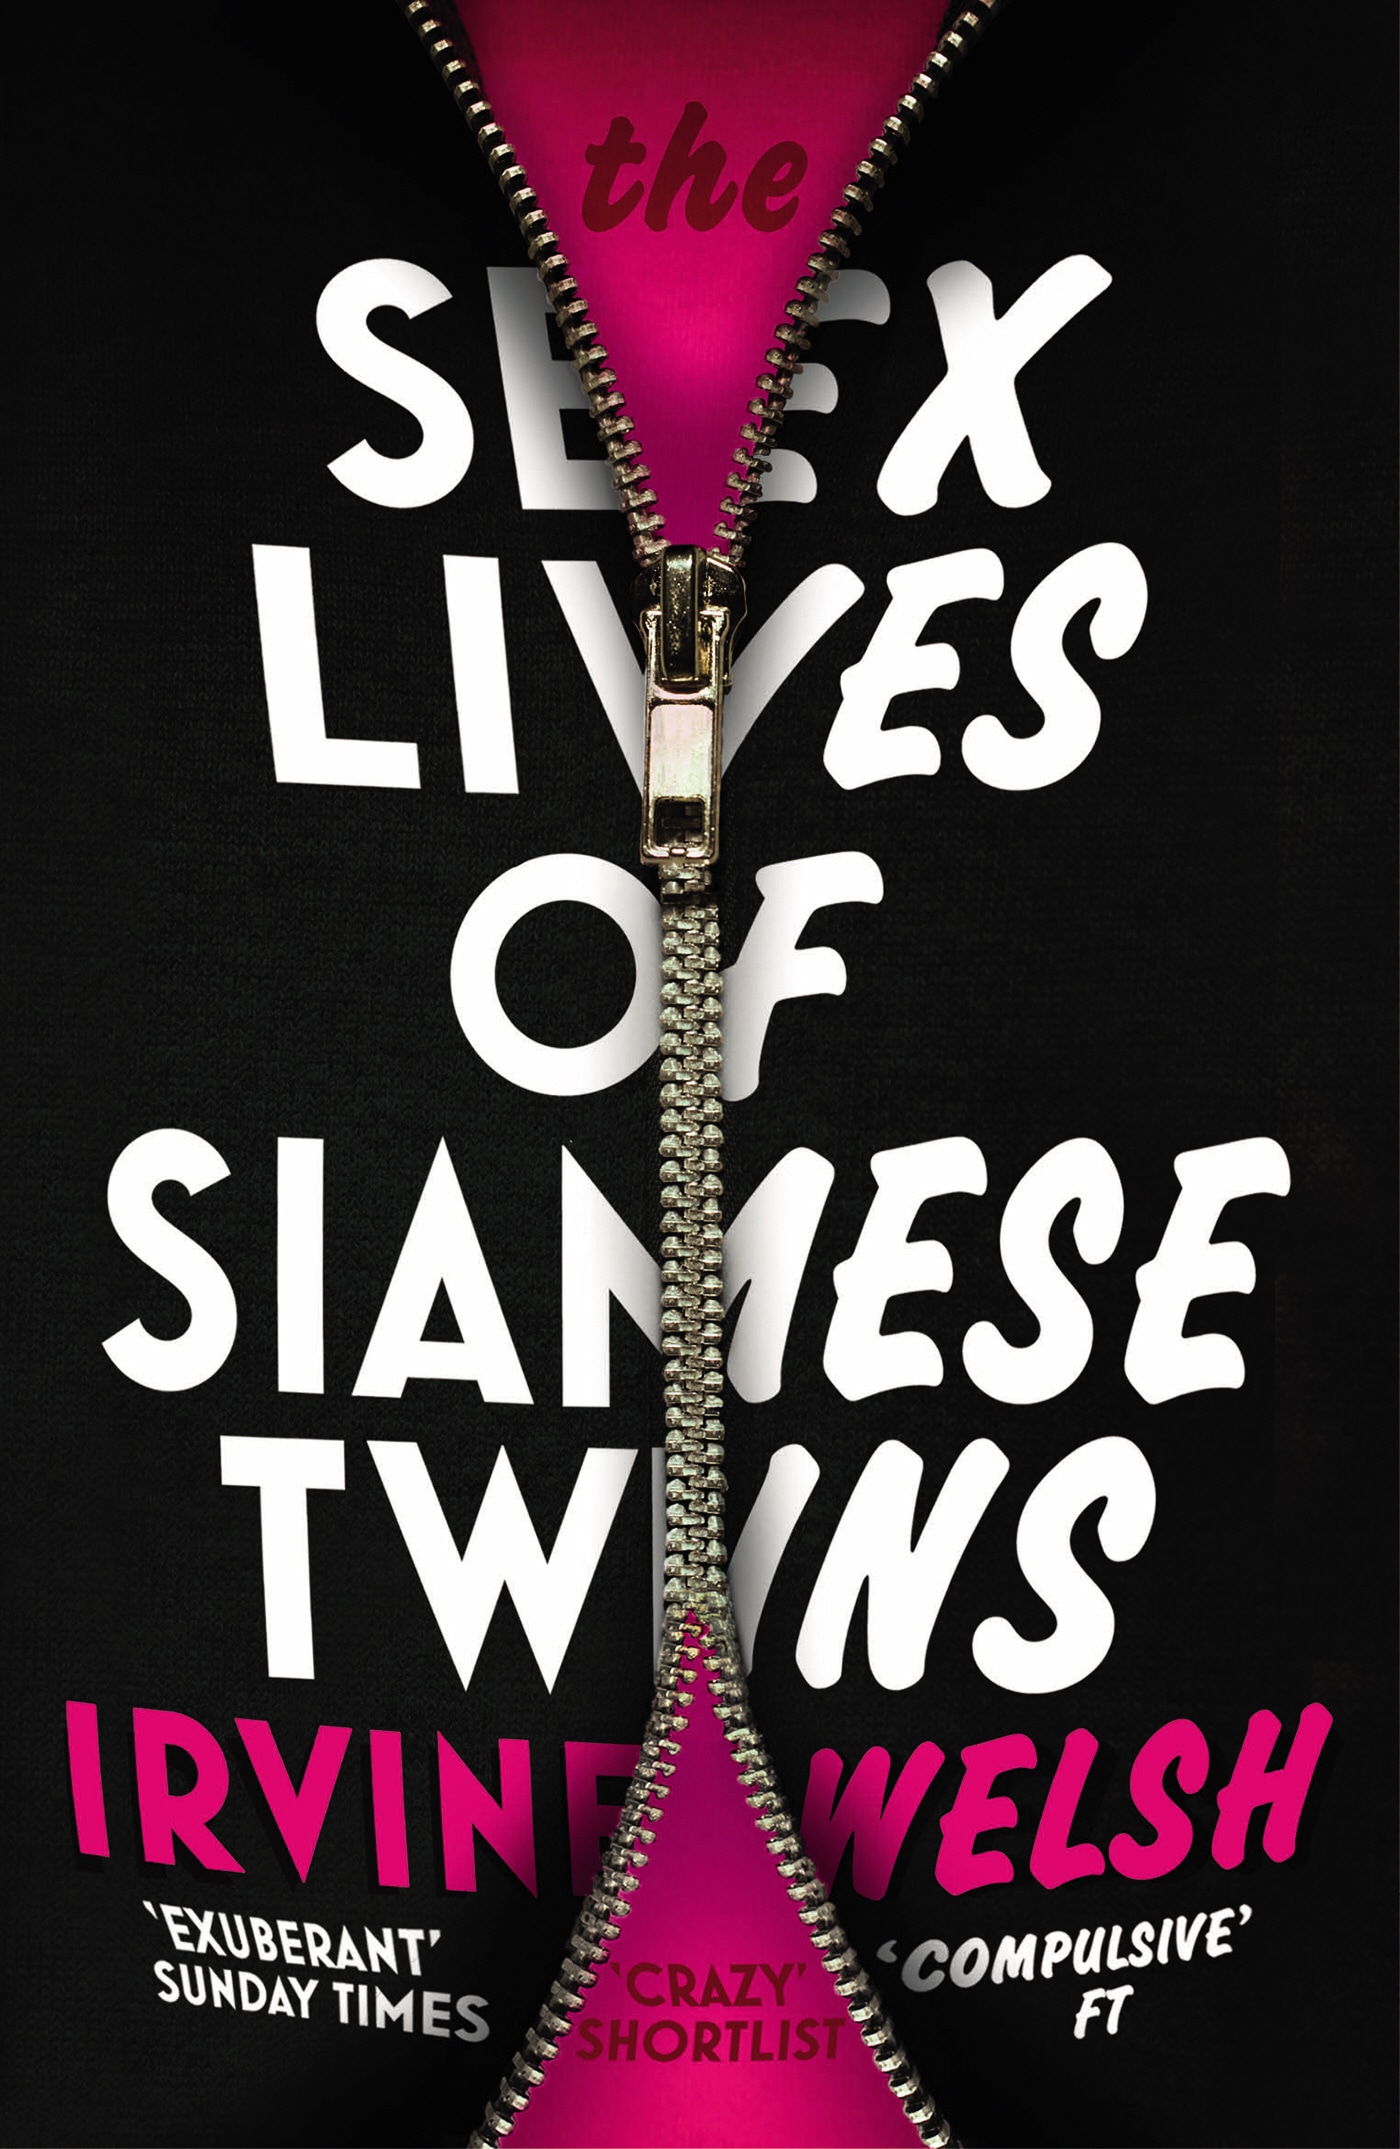 Book “The Sex Lives of Siamese Twins” by Irvine Welsh — April 2, 2015